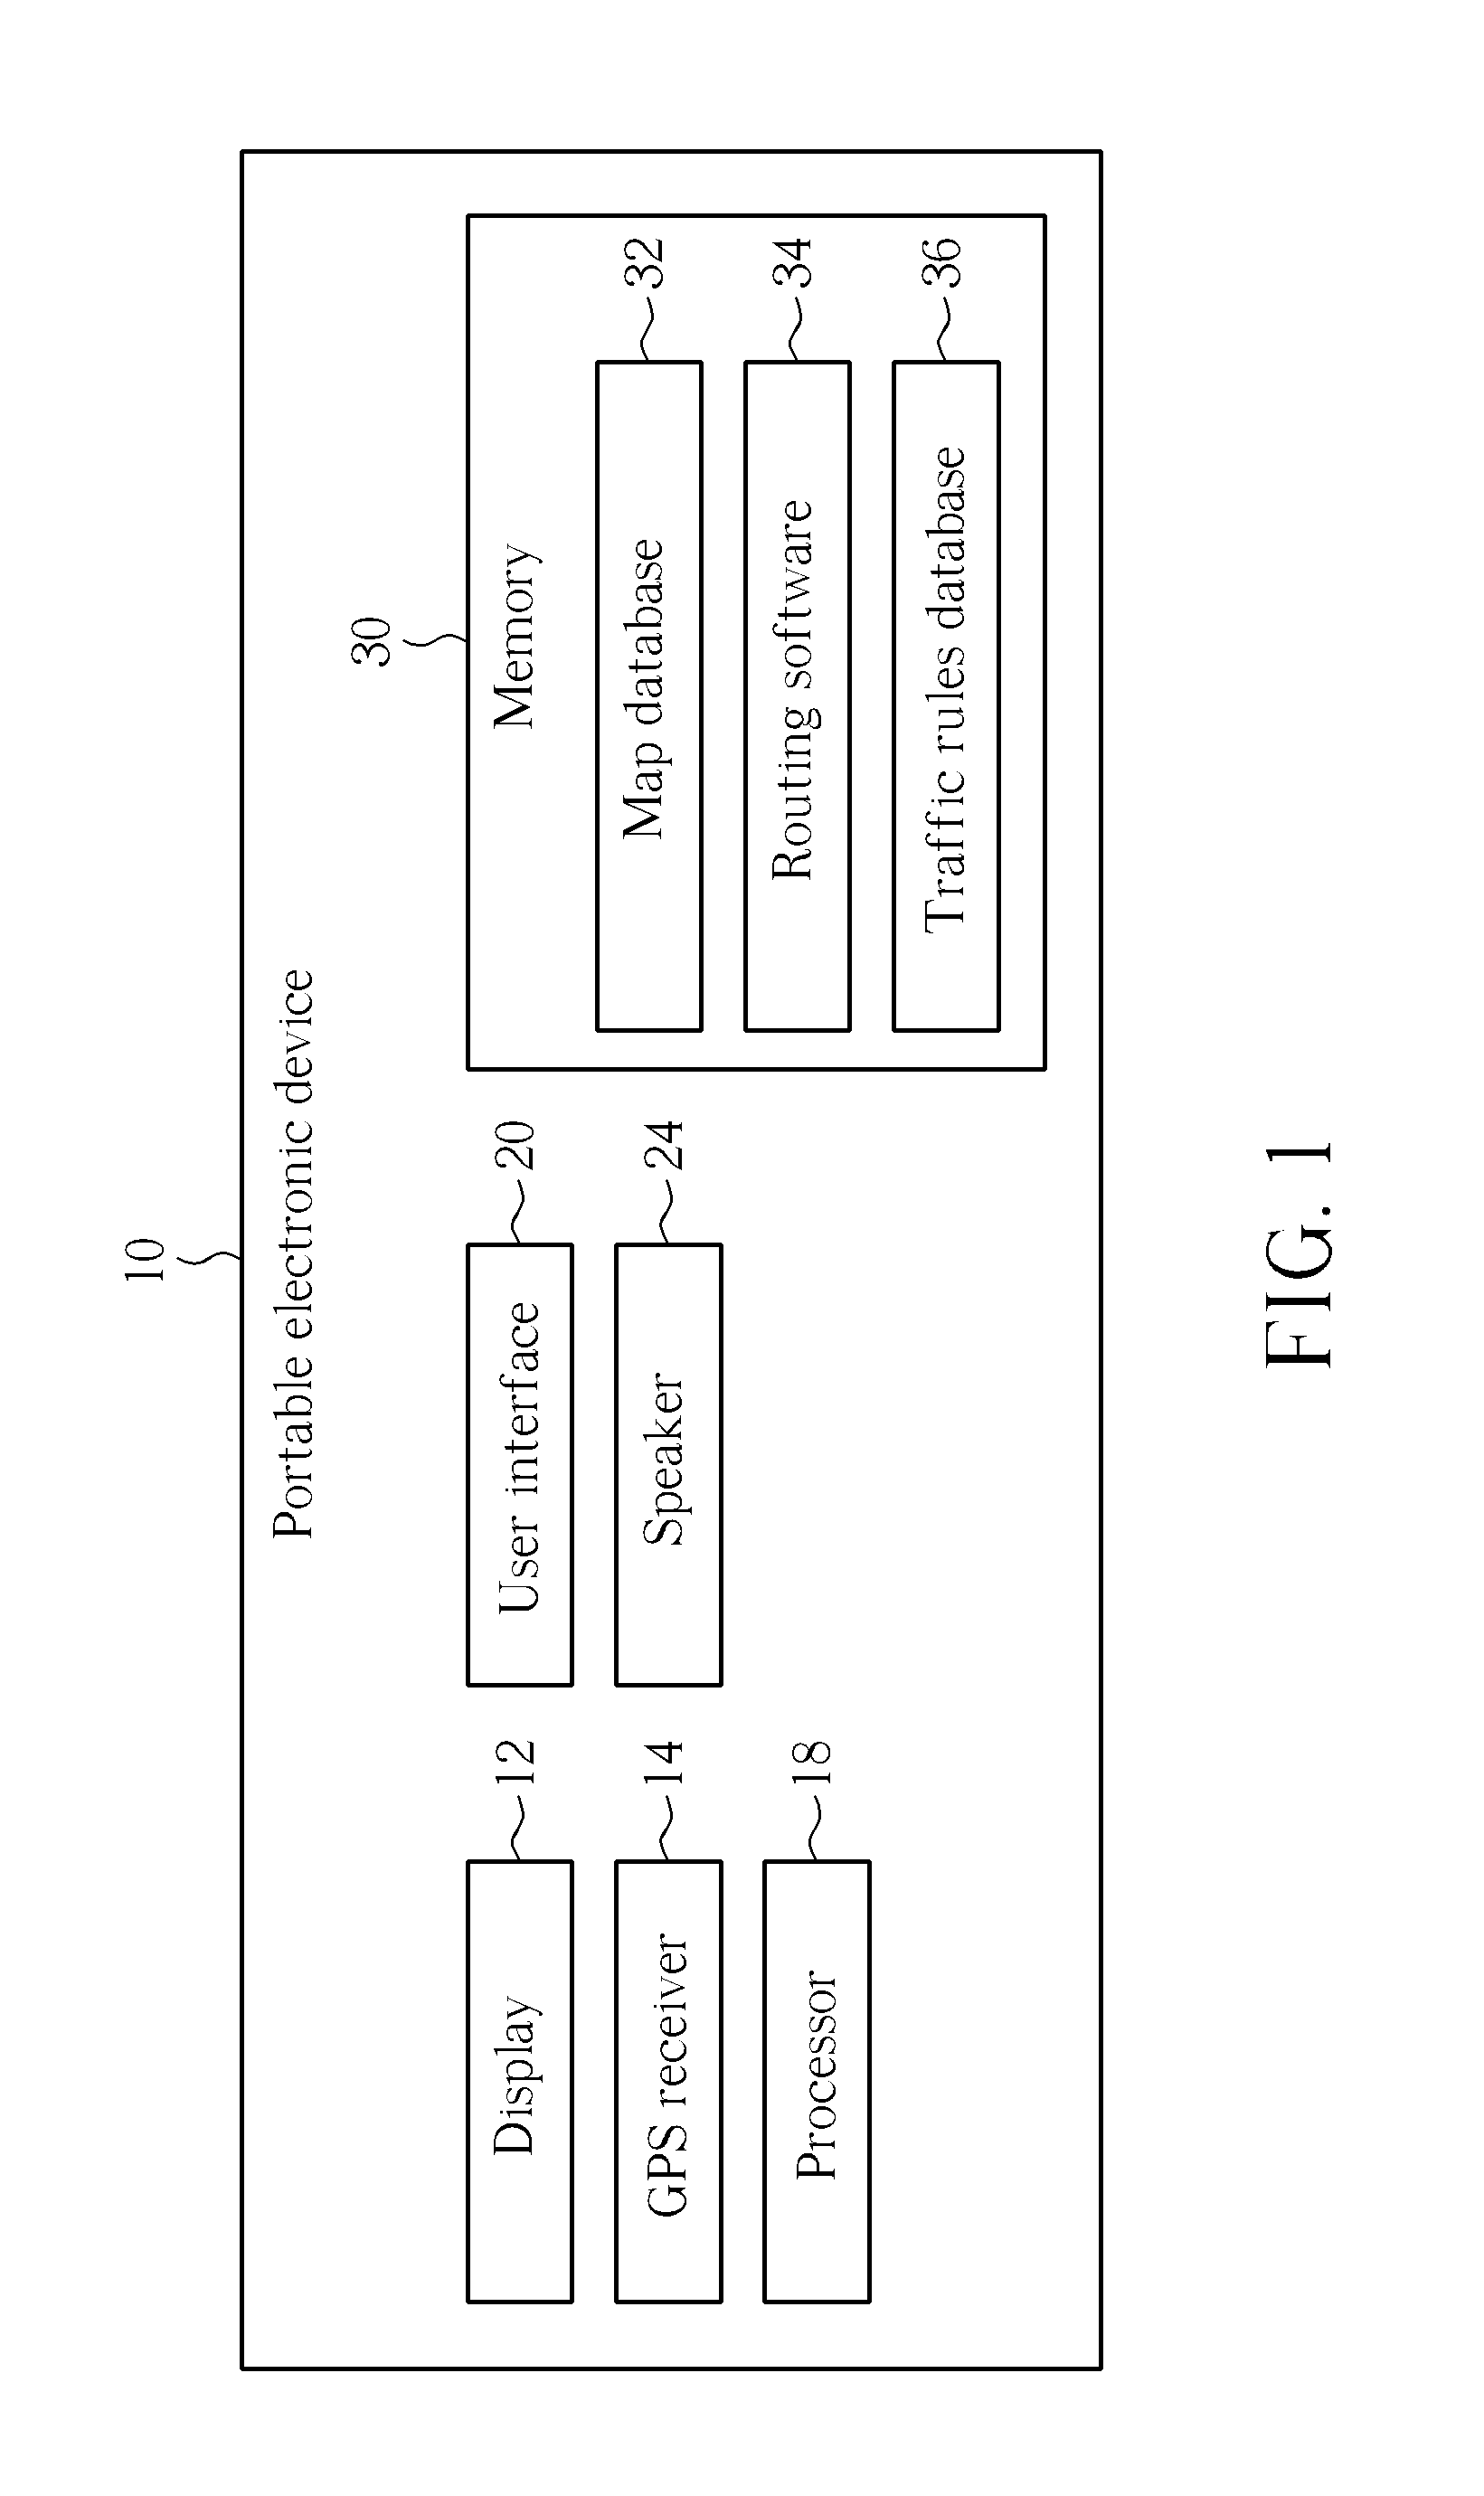 Method of providing intersection assistance and related portable electronic device